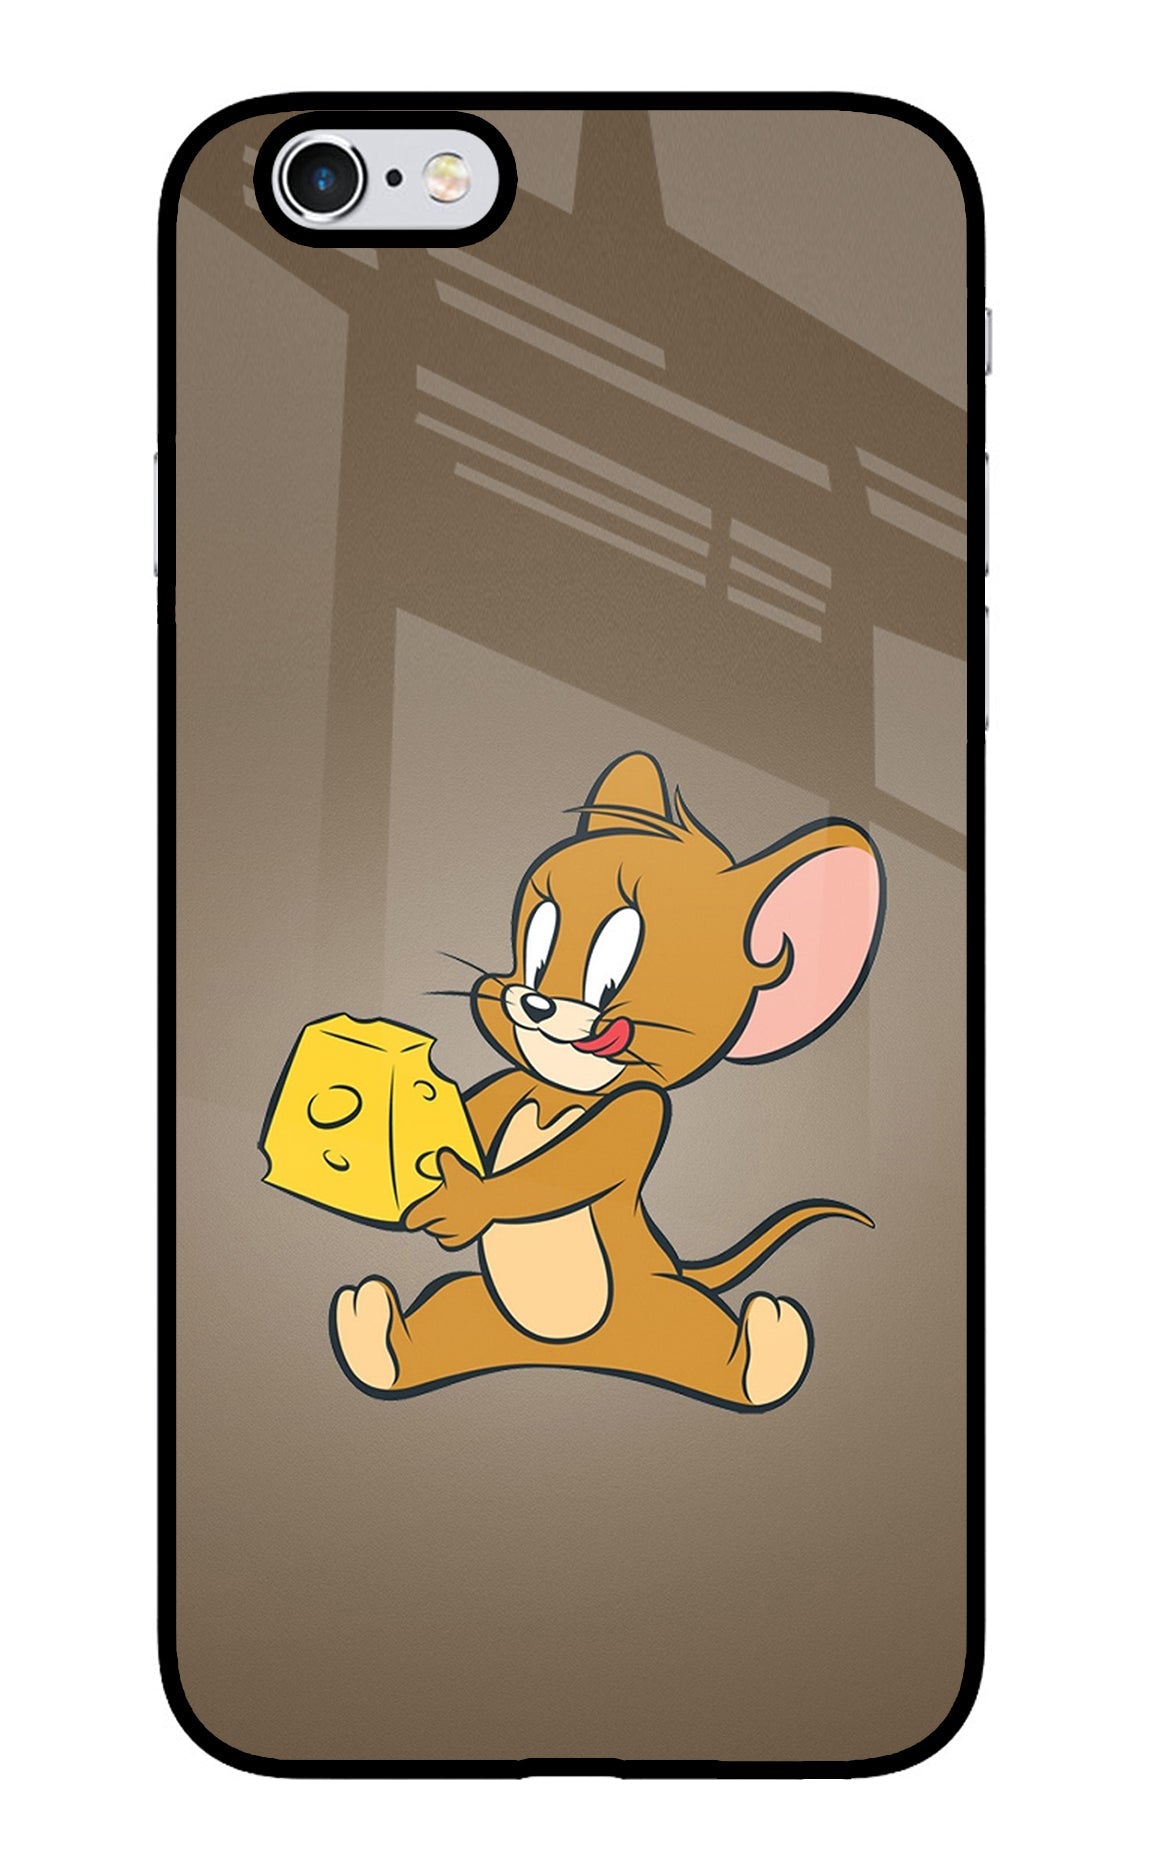 Jerry iPhone 6/6s Glass Case